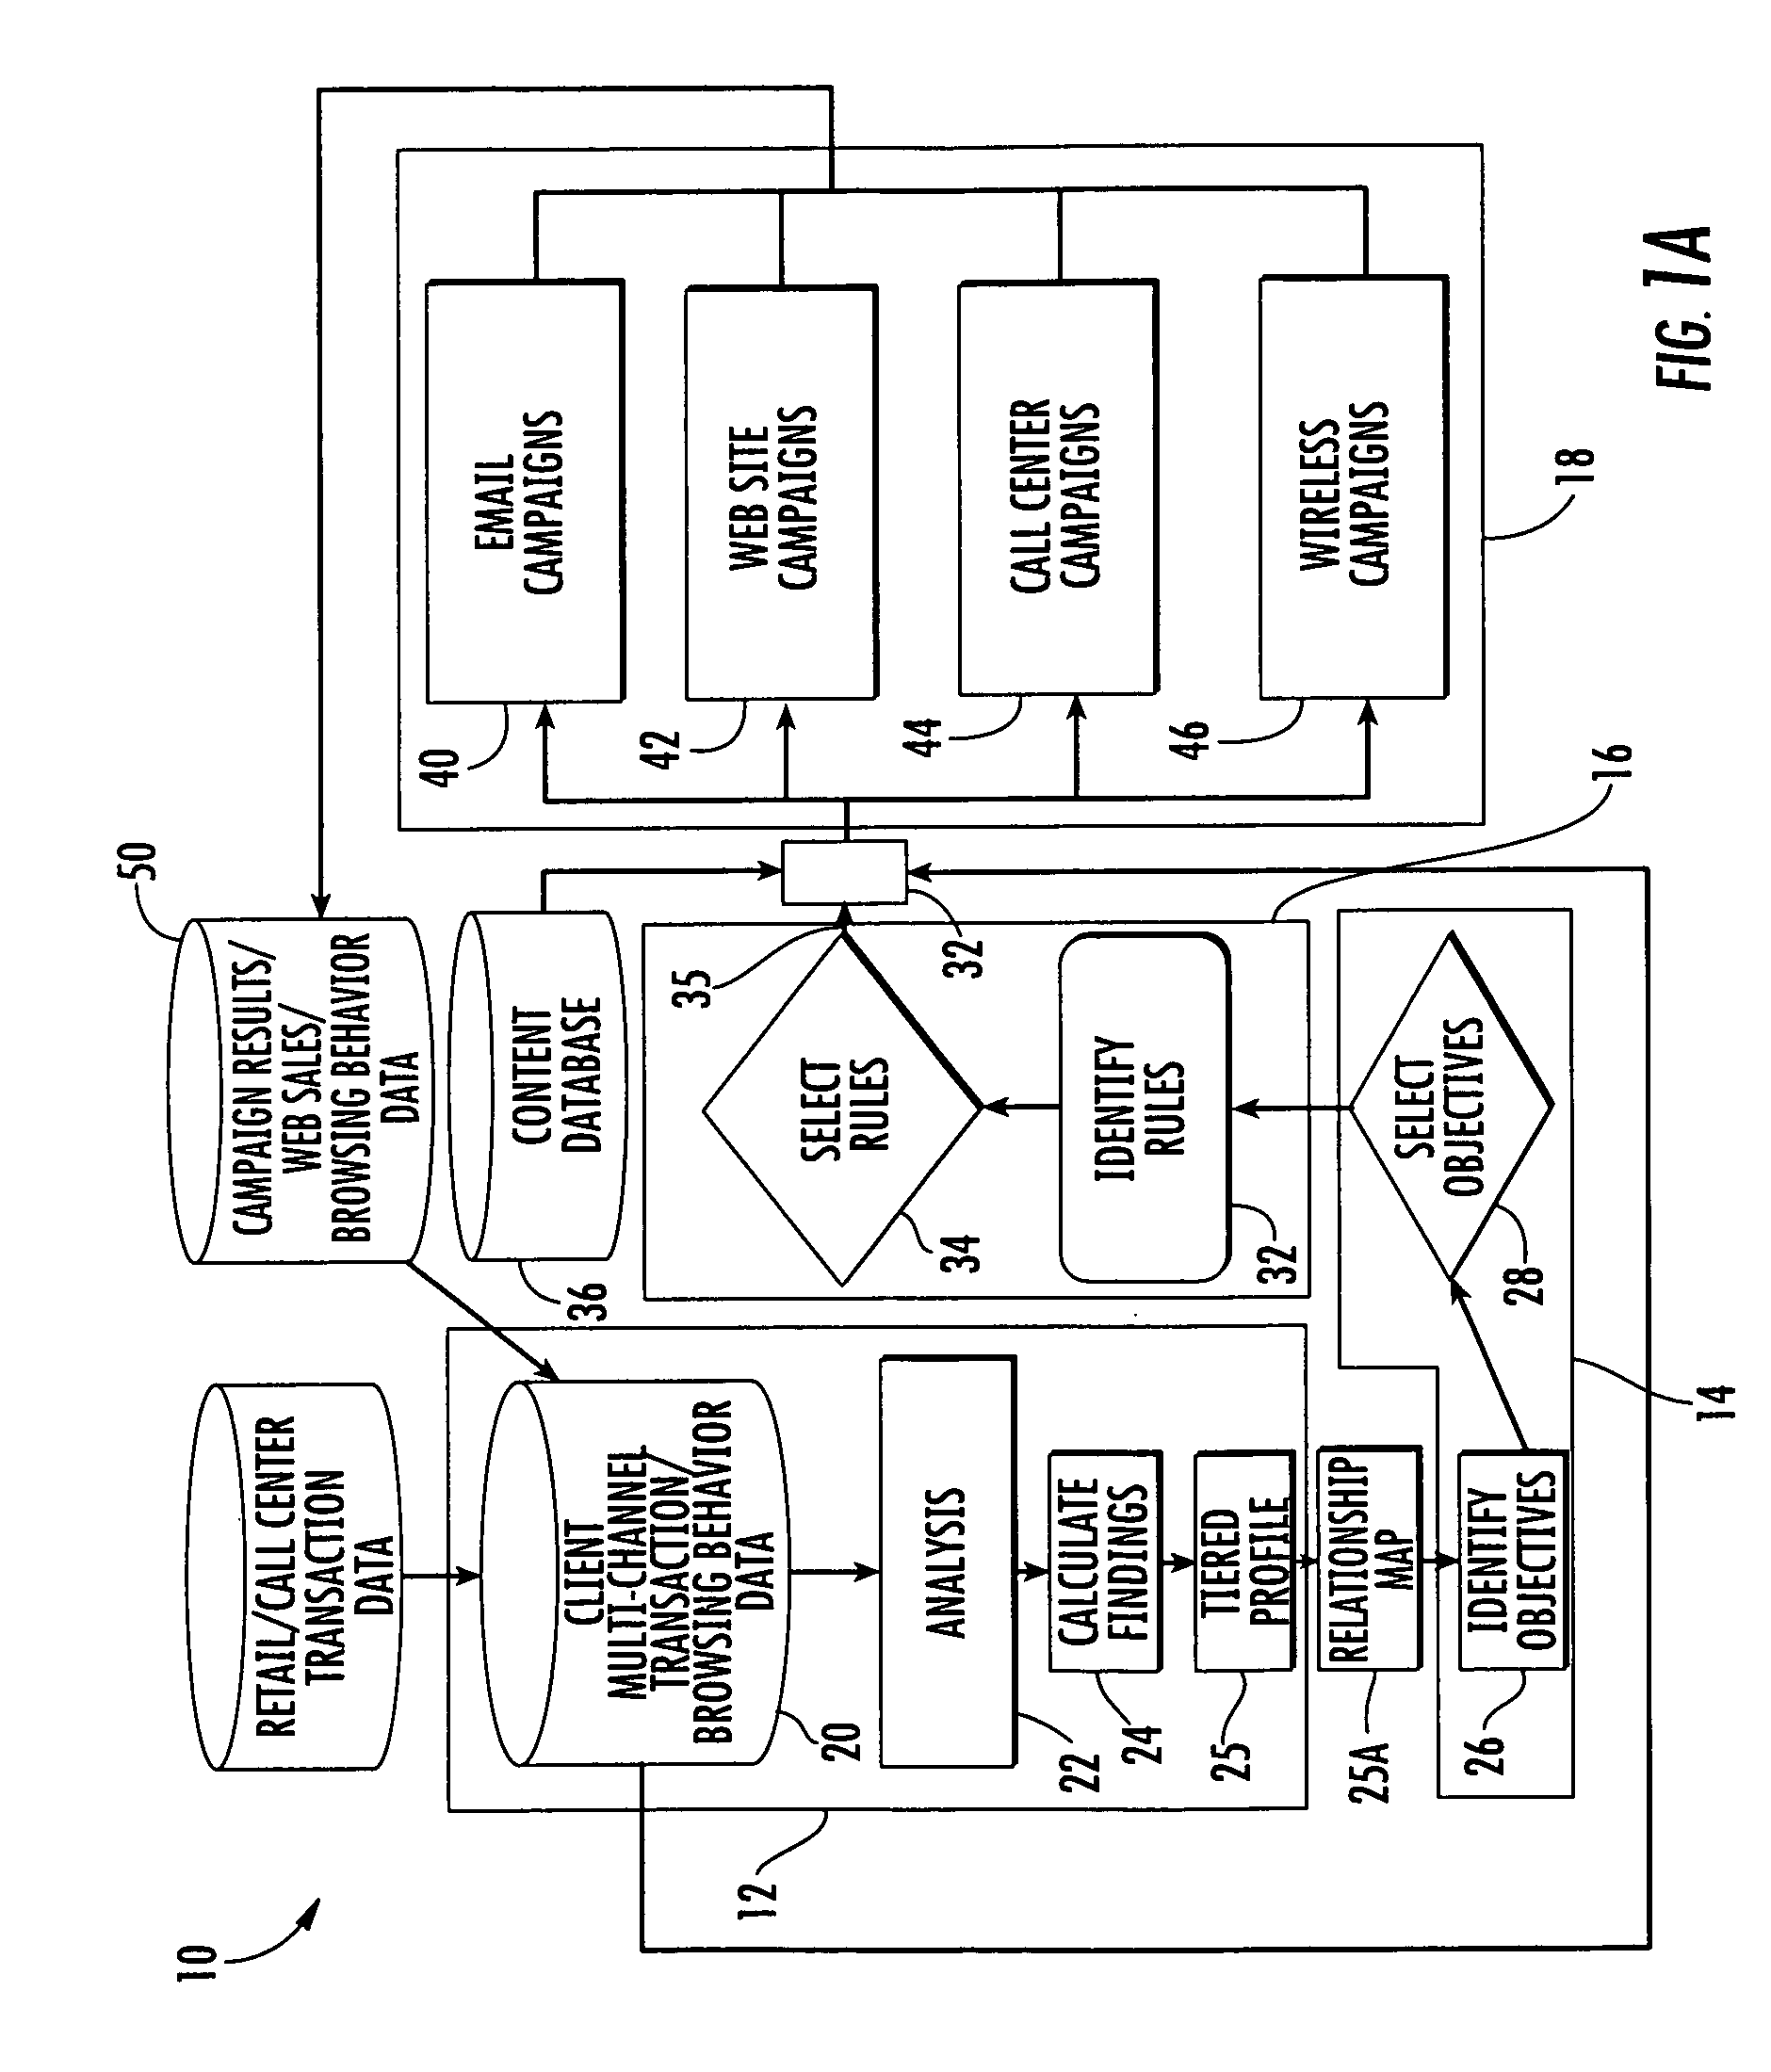 Multichannel tiered profile marketing method and apparatus